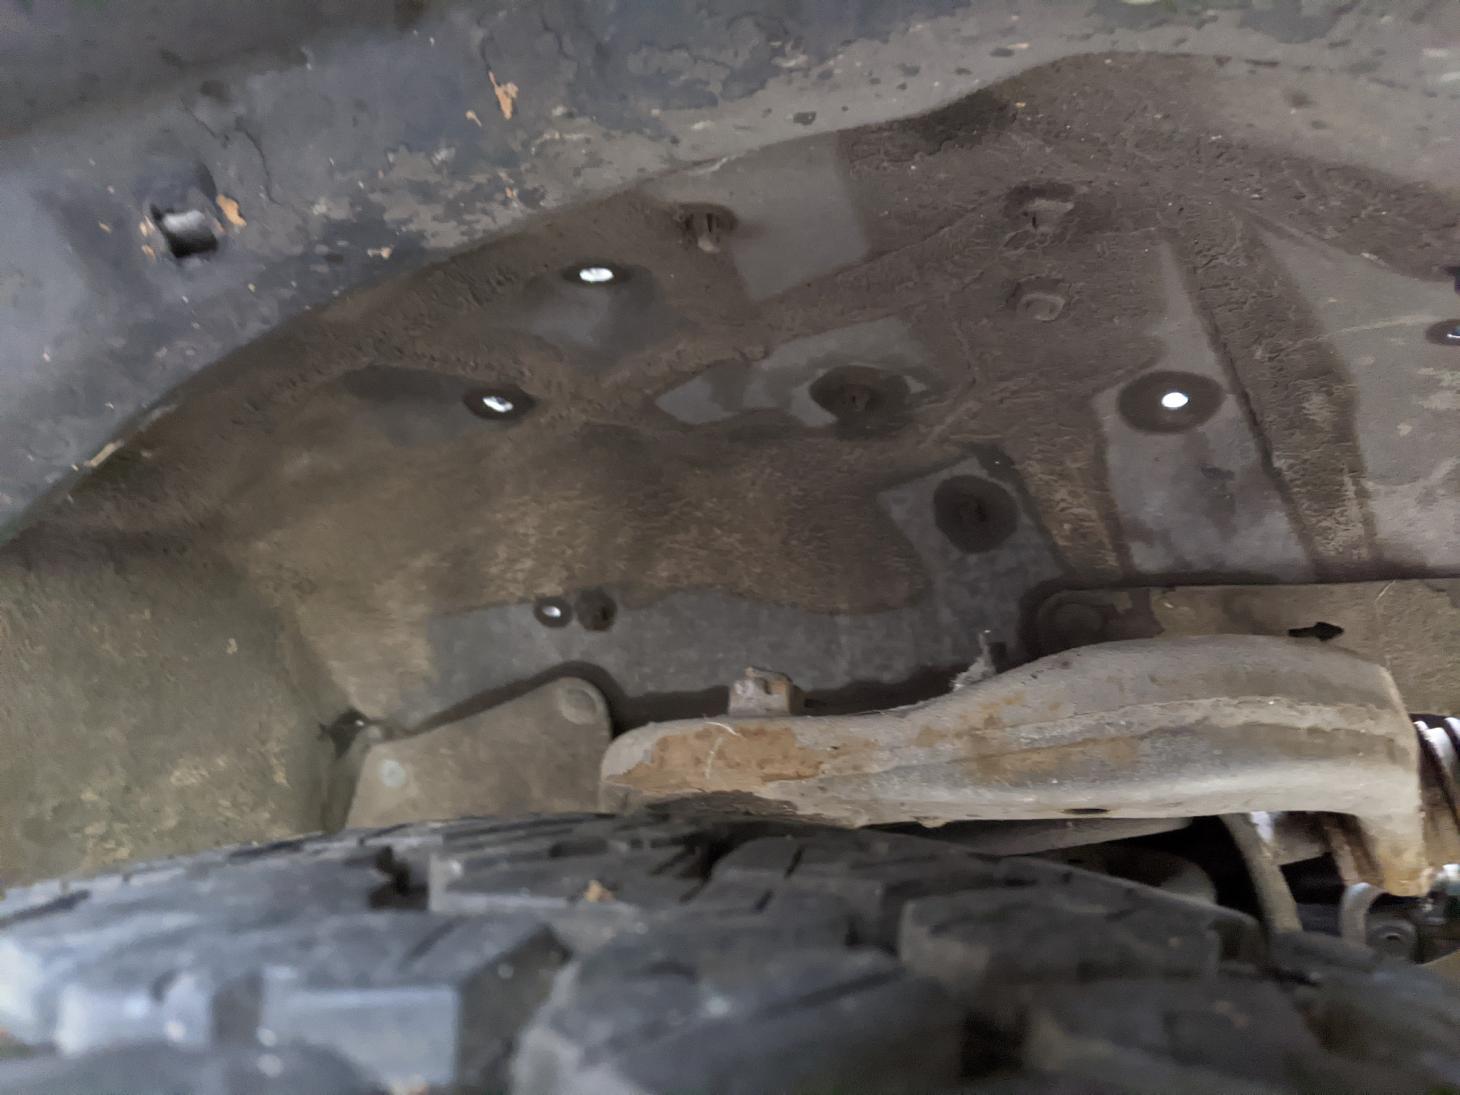 what skid cover is this?-pxl_20201107_203101508-jpg